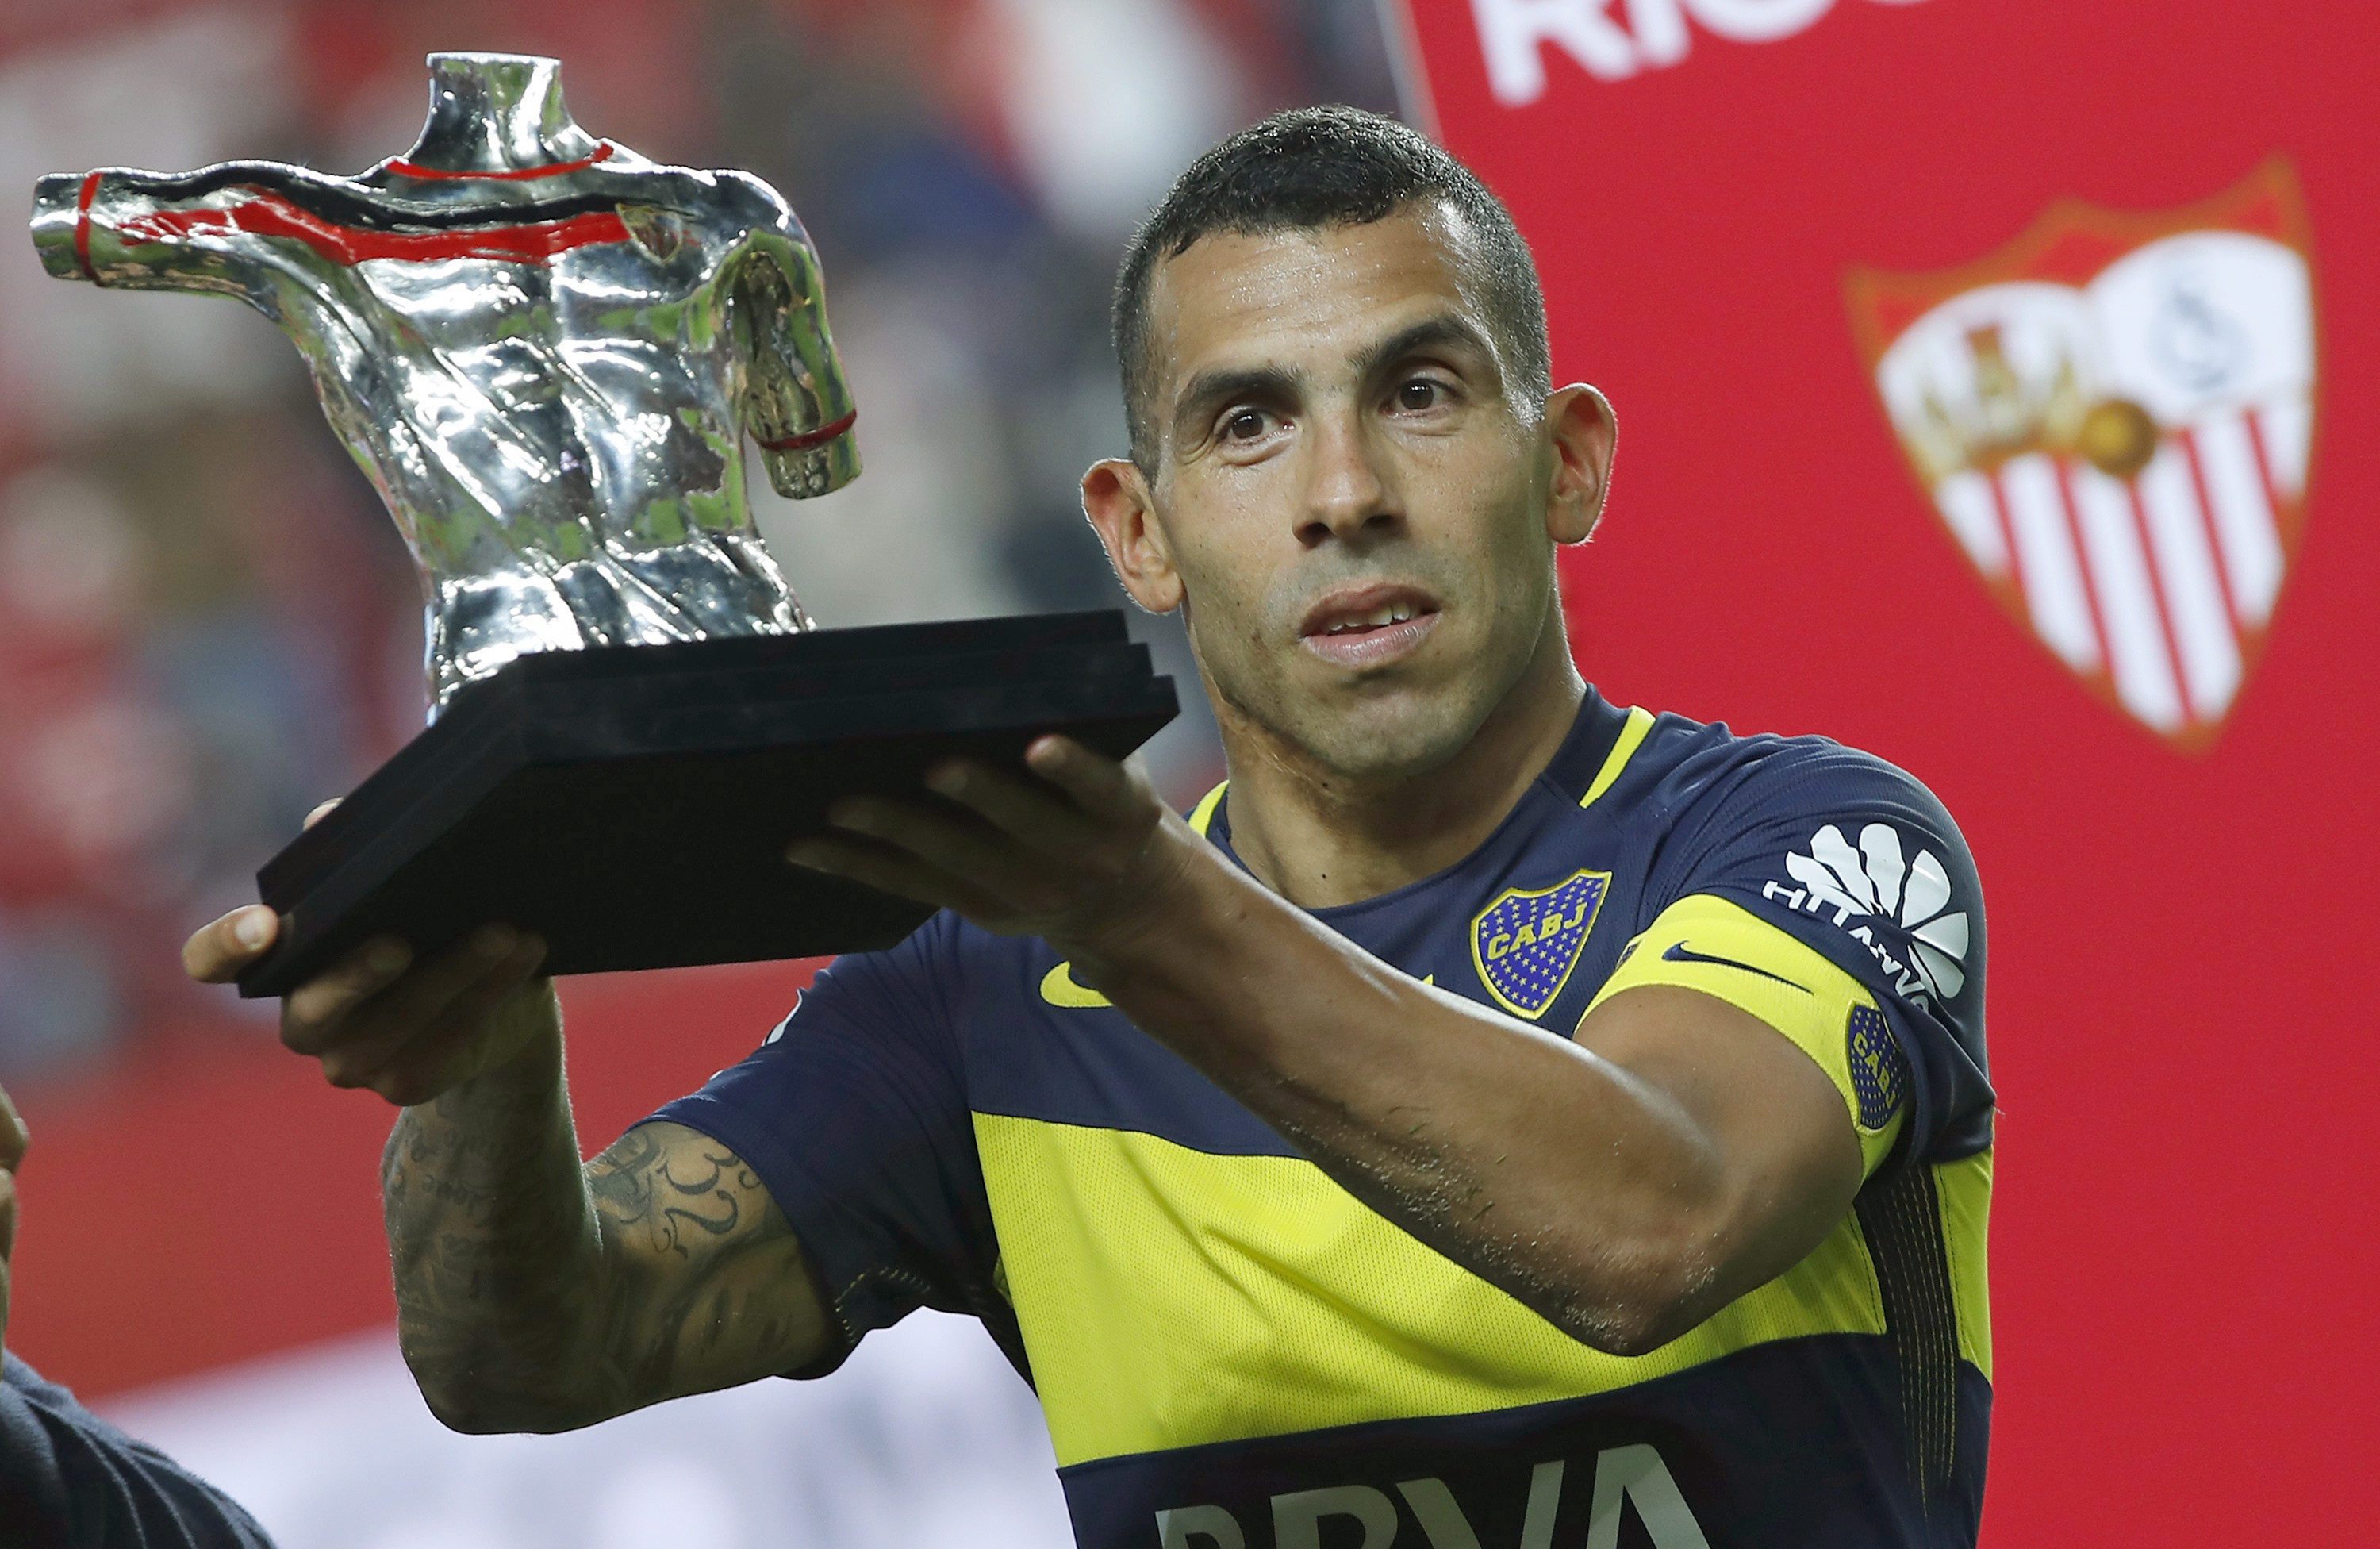 2016-11-11 00:00:00 epa05627727 Boca Juniors' captain Carlos Tevez poses with the trophy after defeating Sevilla FC during the 8th Antonio Puerta memorial match played at Sanchez Pijuan stadium in Seville, Andalusia Spain on 11 November 2016. Antonio Puerta was a Sevilla player who died during a soccer match in 2007. EPA/JULIO MUNOZ